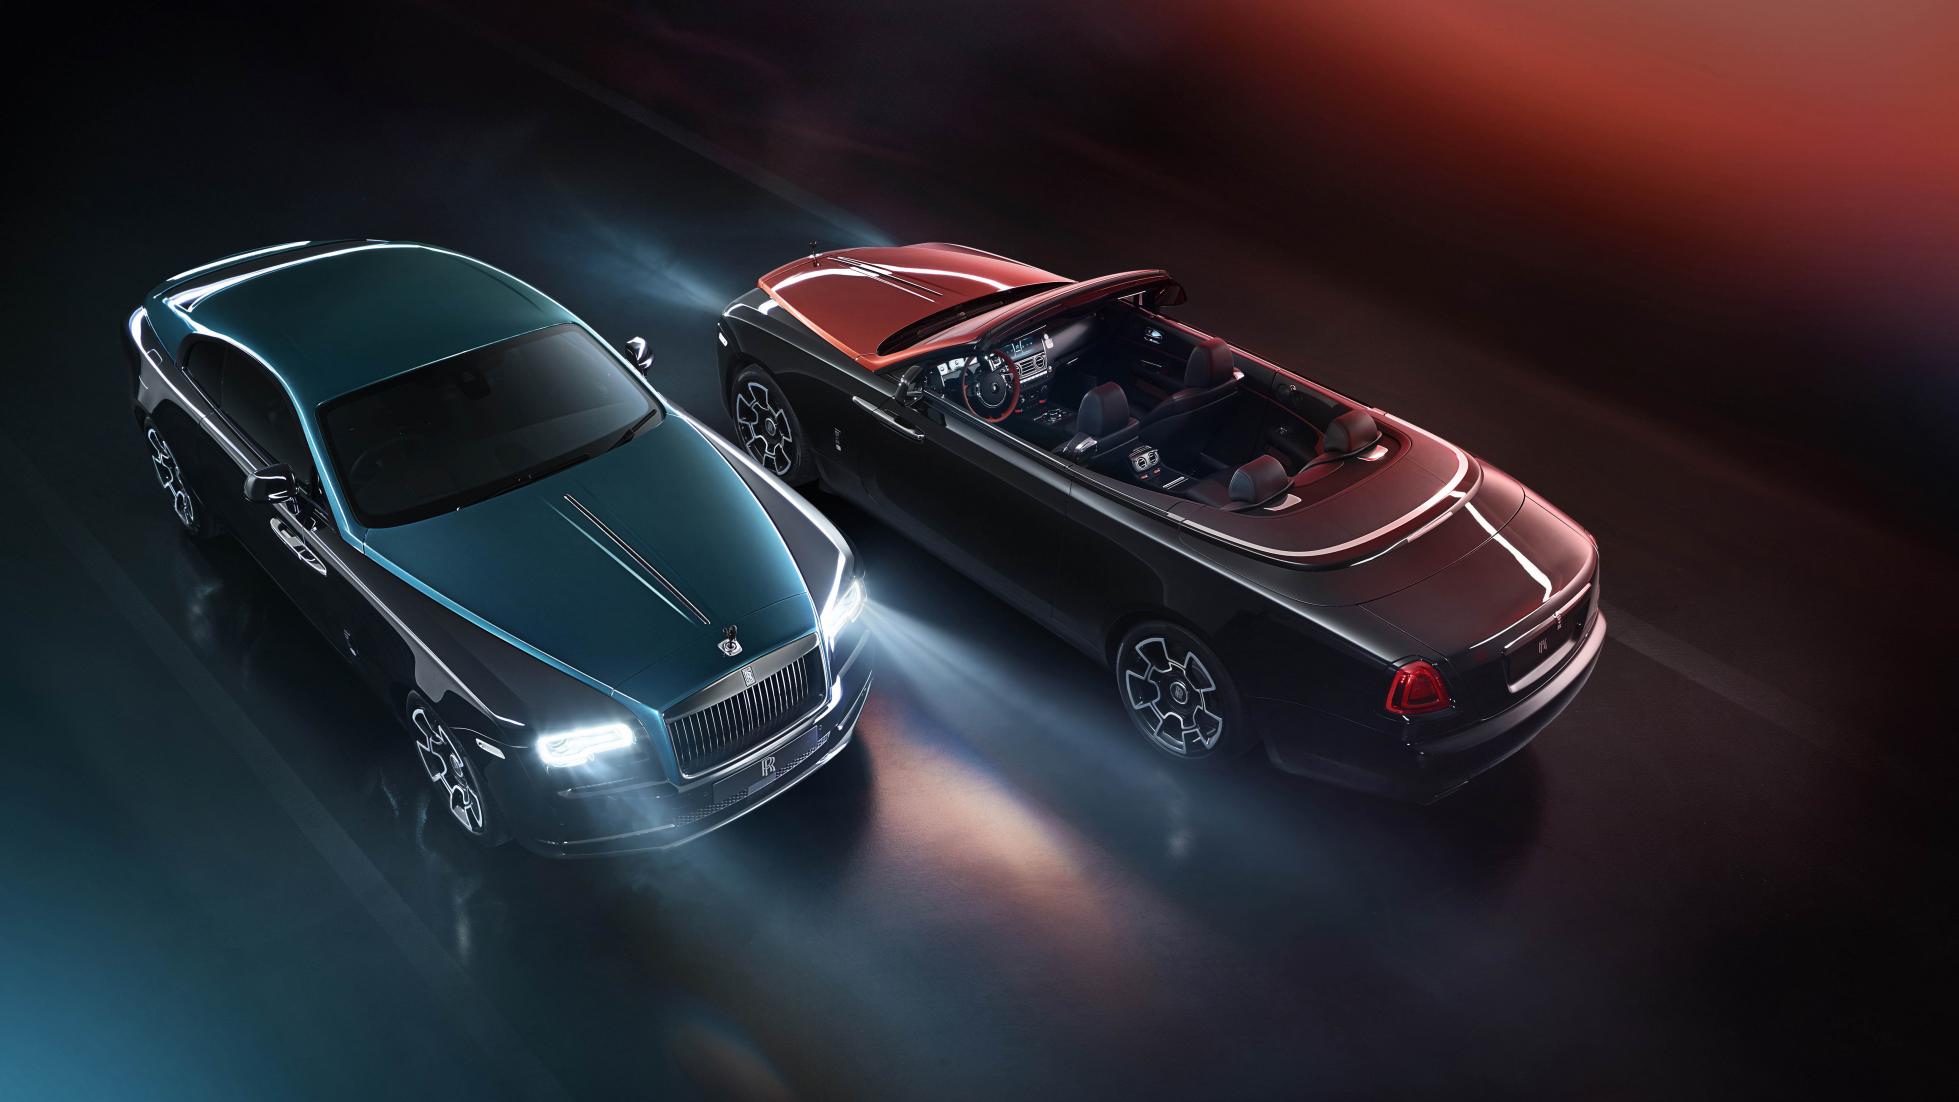 Rolls-Royce takes luxury to the dark side with the new Adamas Collection